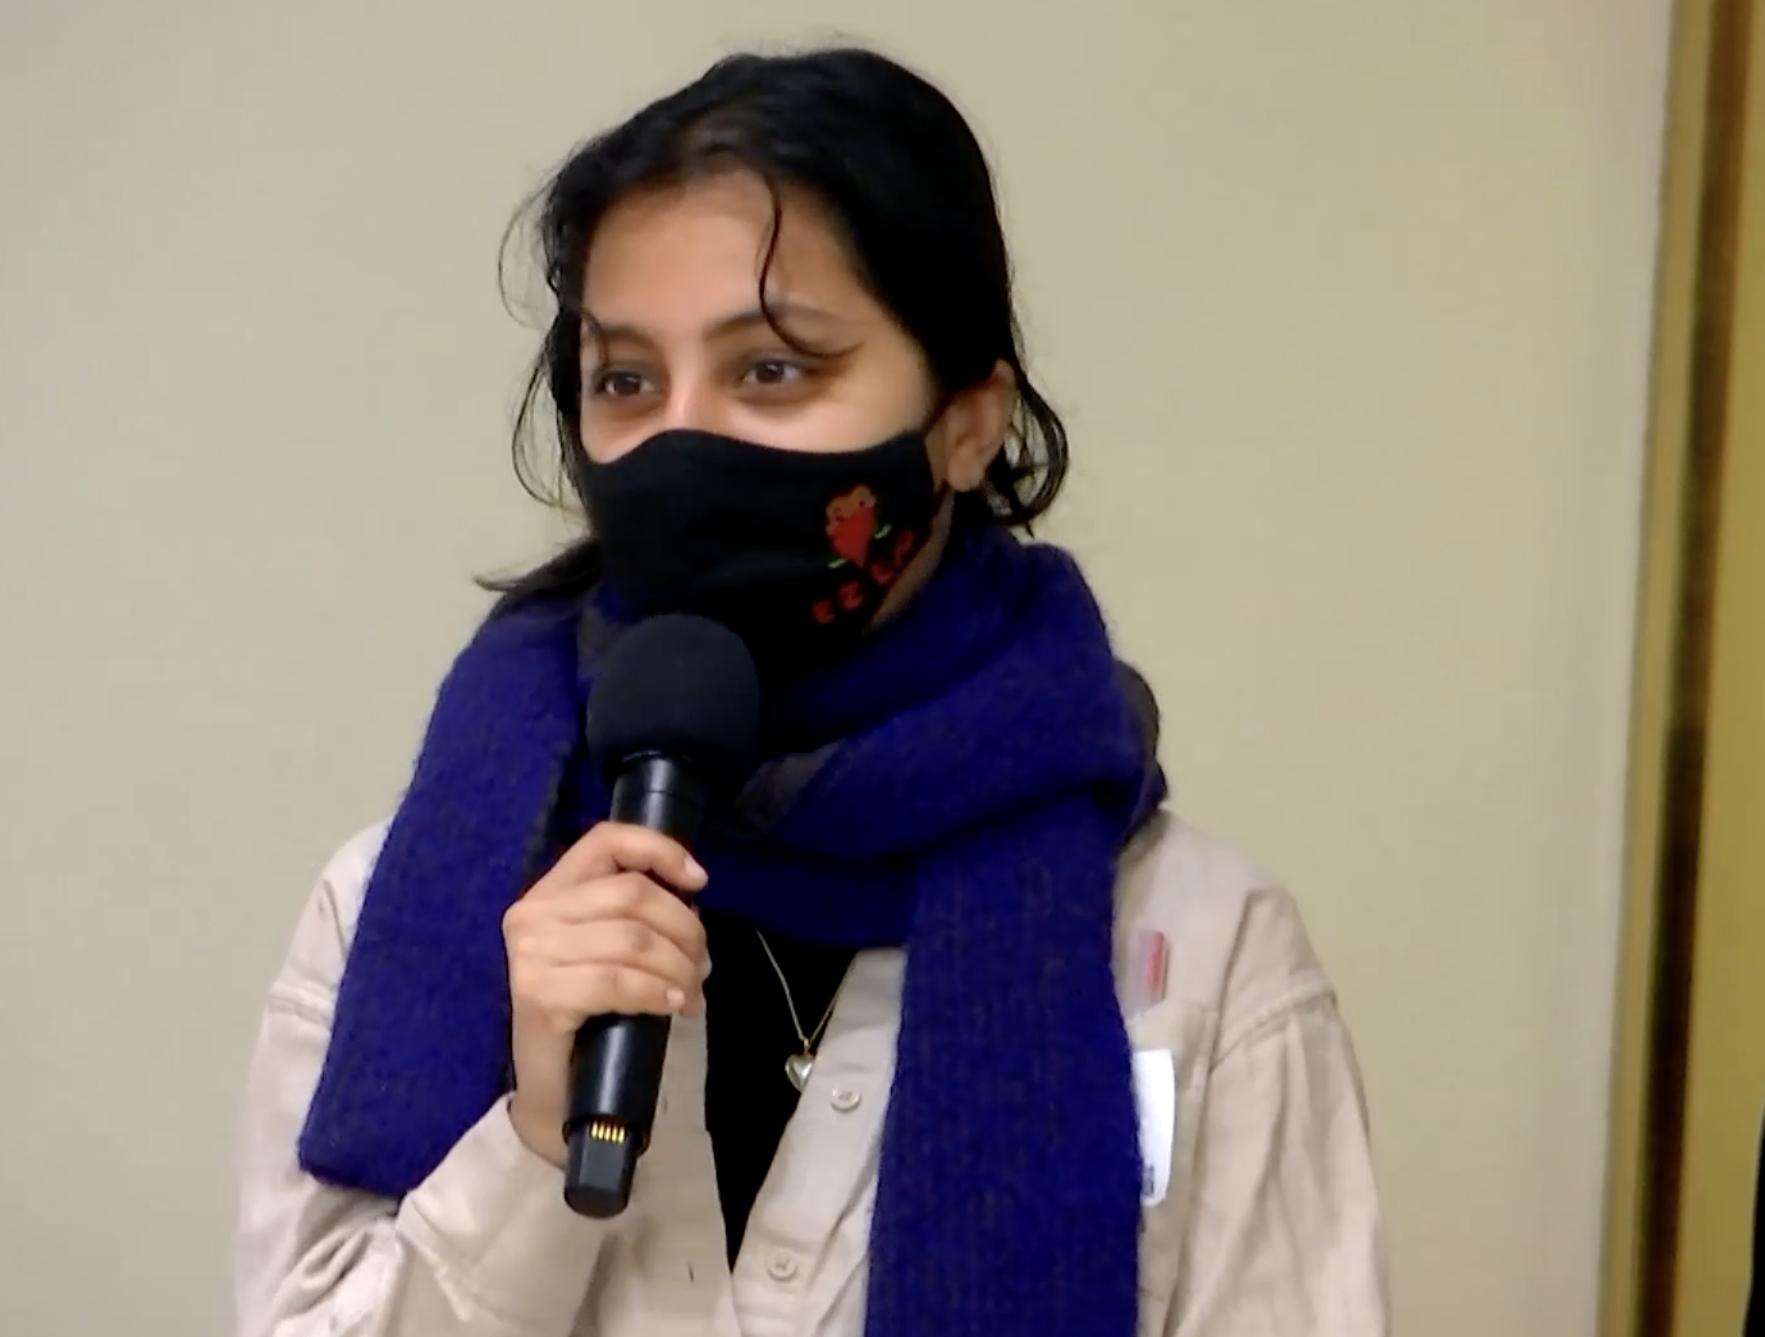 South asian person with hair pulled into a bun, wearing a black mask with a zapatista image and a thick blue scarf wrapped around their neck, holding a mic to their face